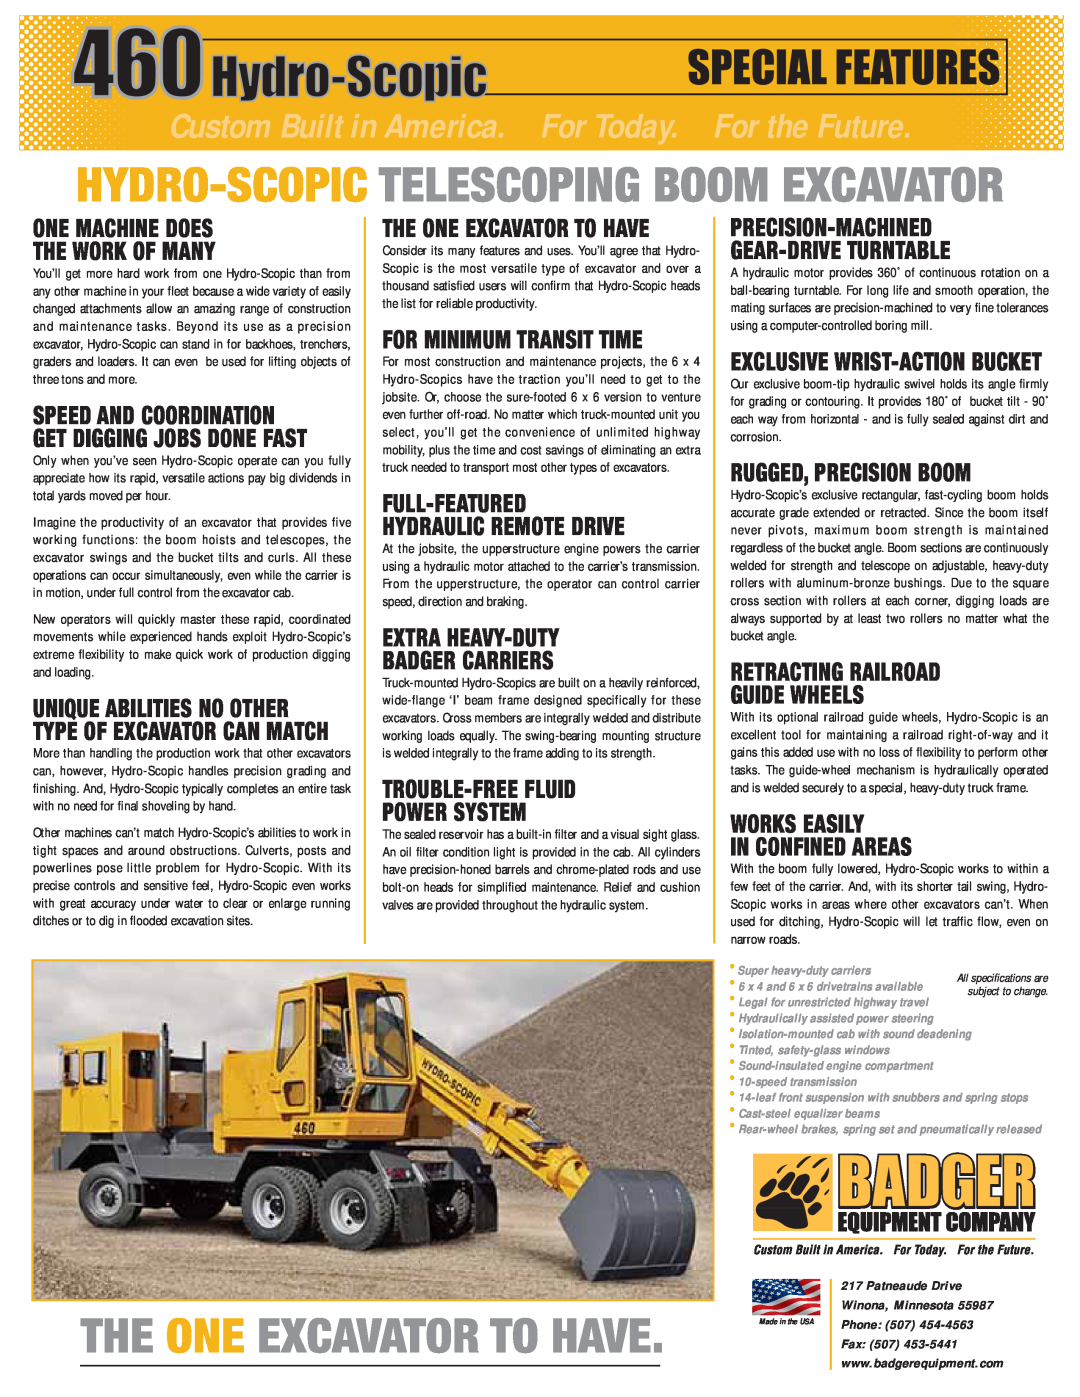 Badger Basket 460 specifications Special Features, The One Excavator To Have, Hydro-Scopic Telescoping Boom Excavator, Fax 